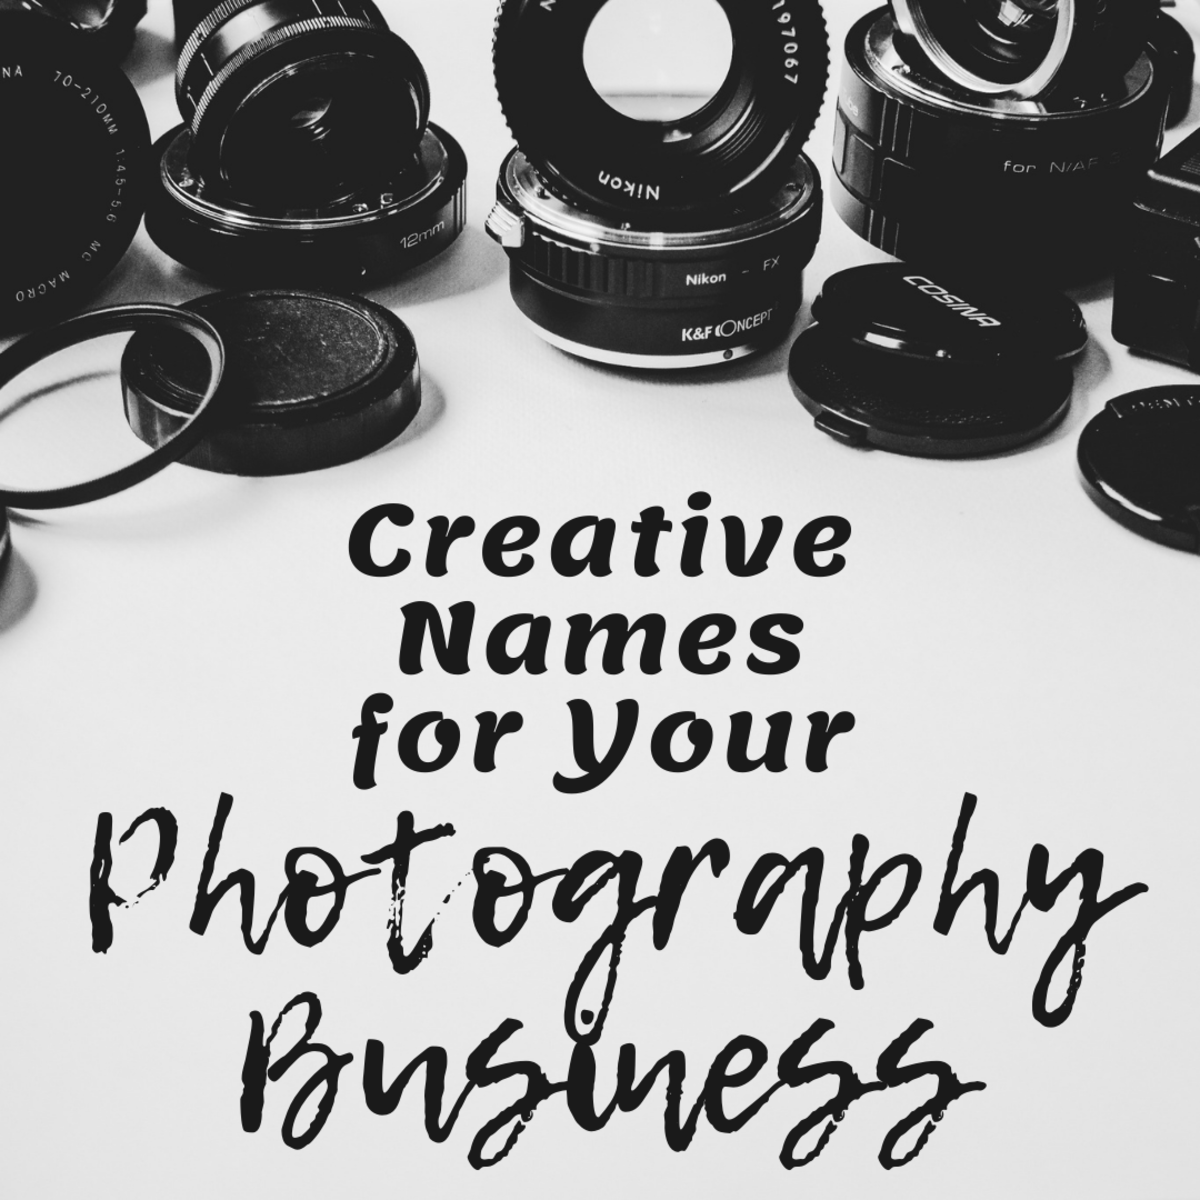 Awesome and creative name ideas for your photography business